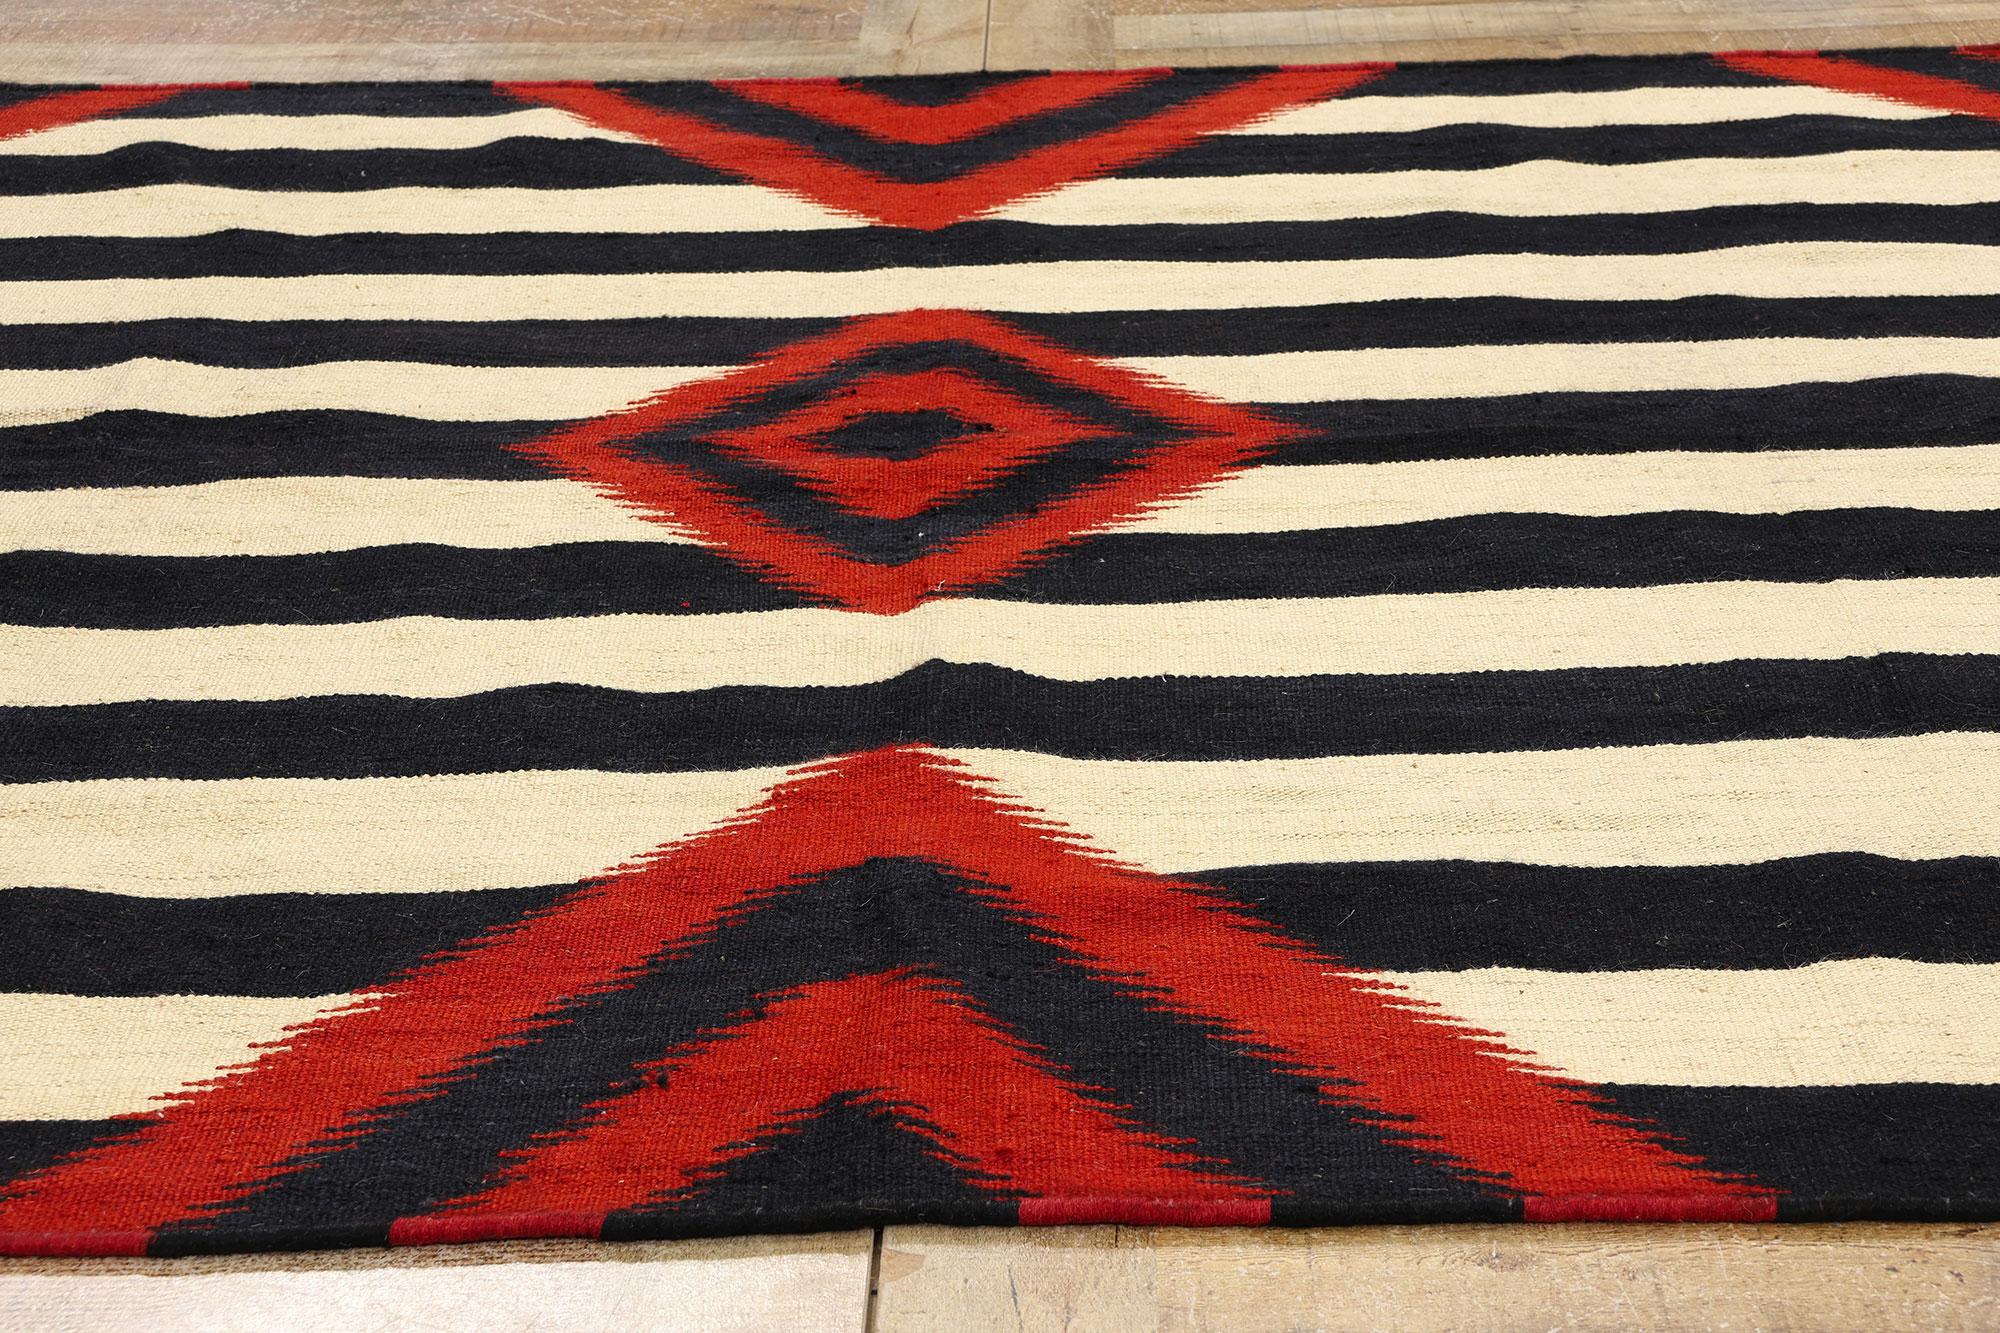 Contemporary Santa Fe Southwest Modern Chief Blanket Navajo-Style Rug  For Sale 1